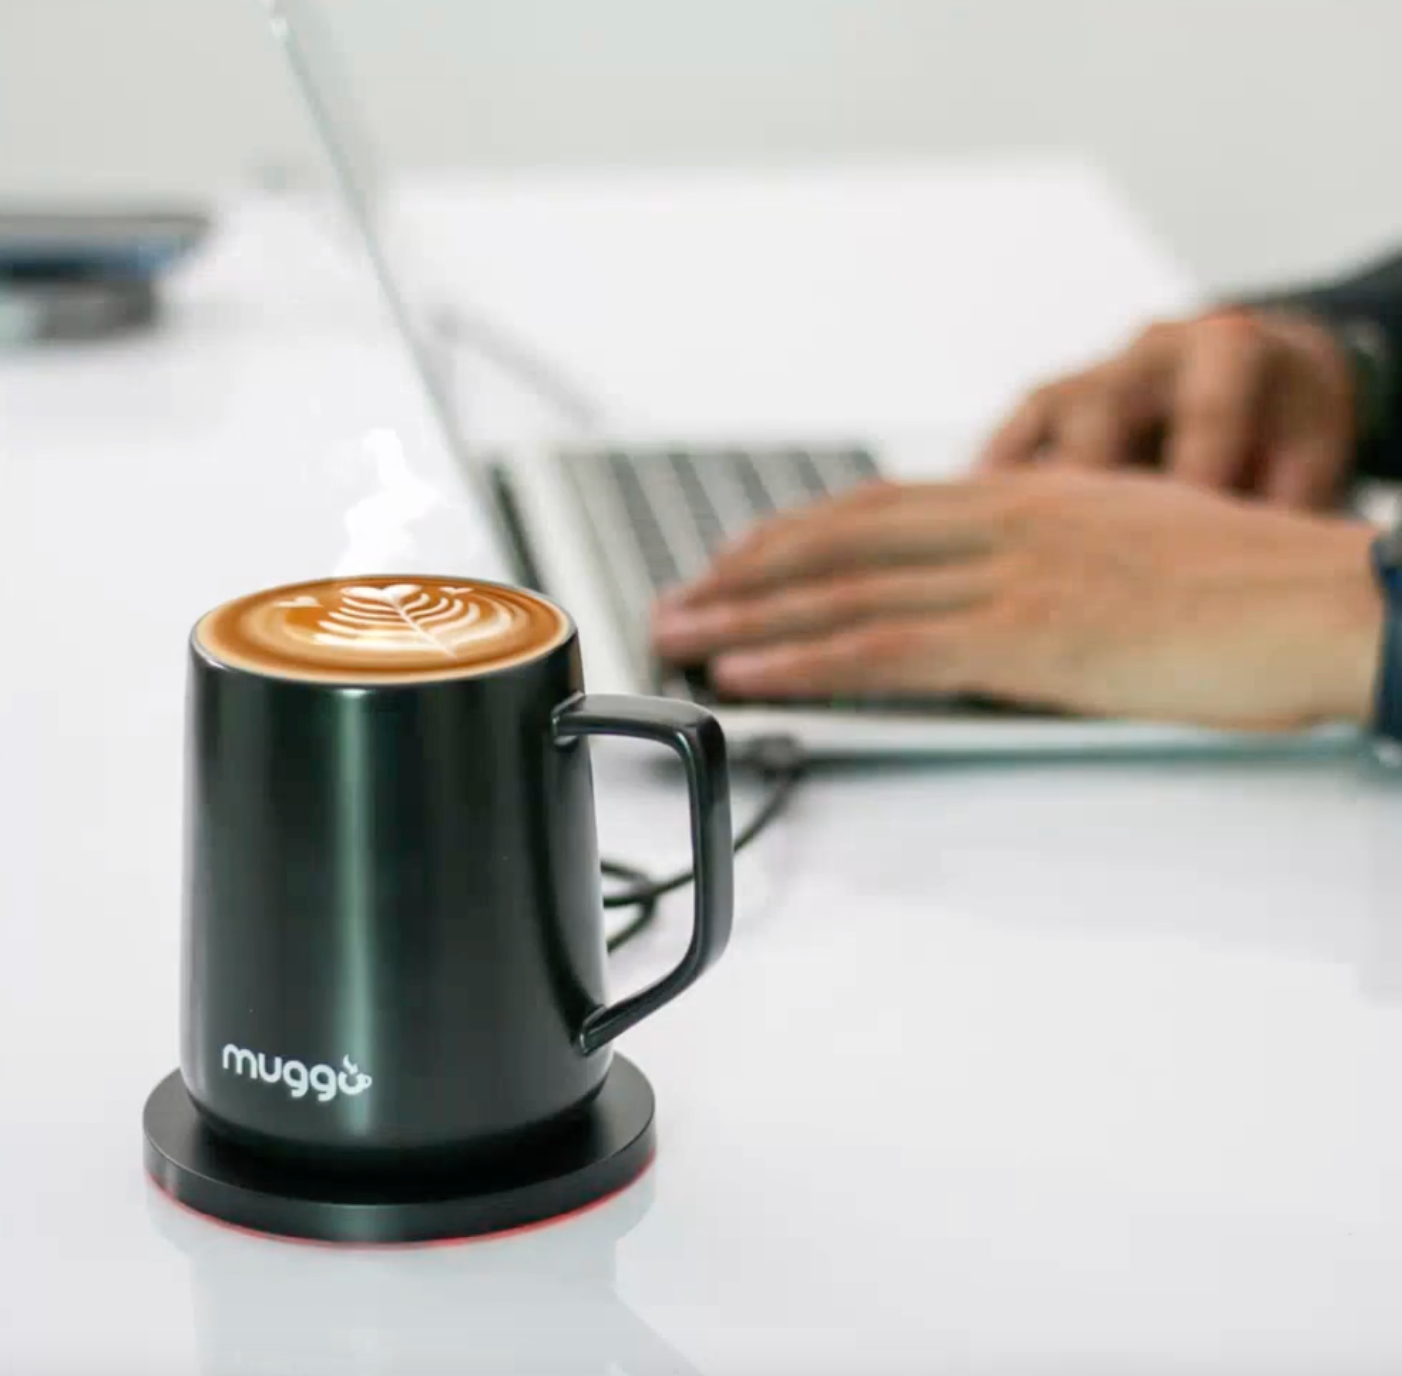 Clever Gadgets | Muggo Qi Grande Edition Black Self-Heated Mug + Wireless Charger Coaster by Weirs of Baggot Street